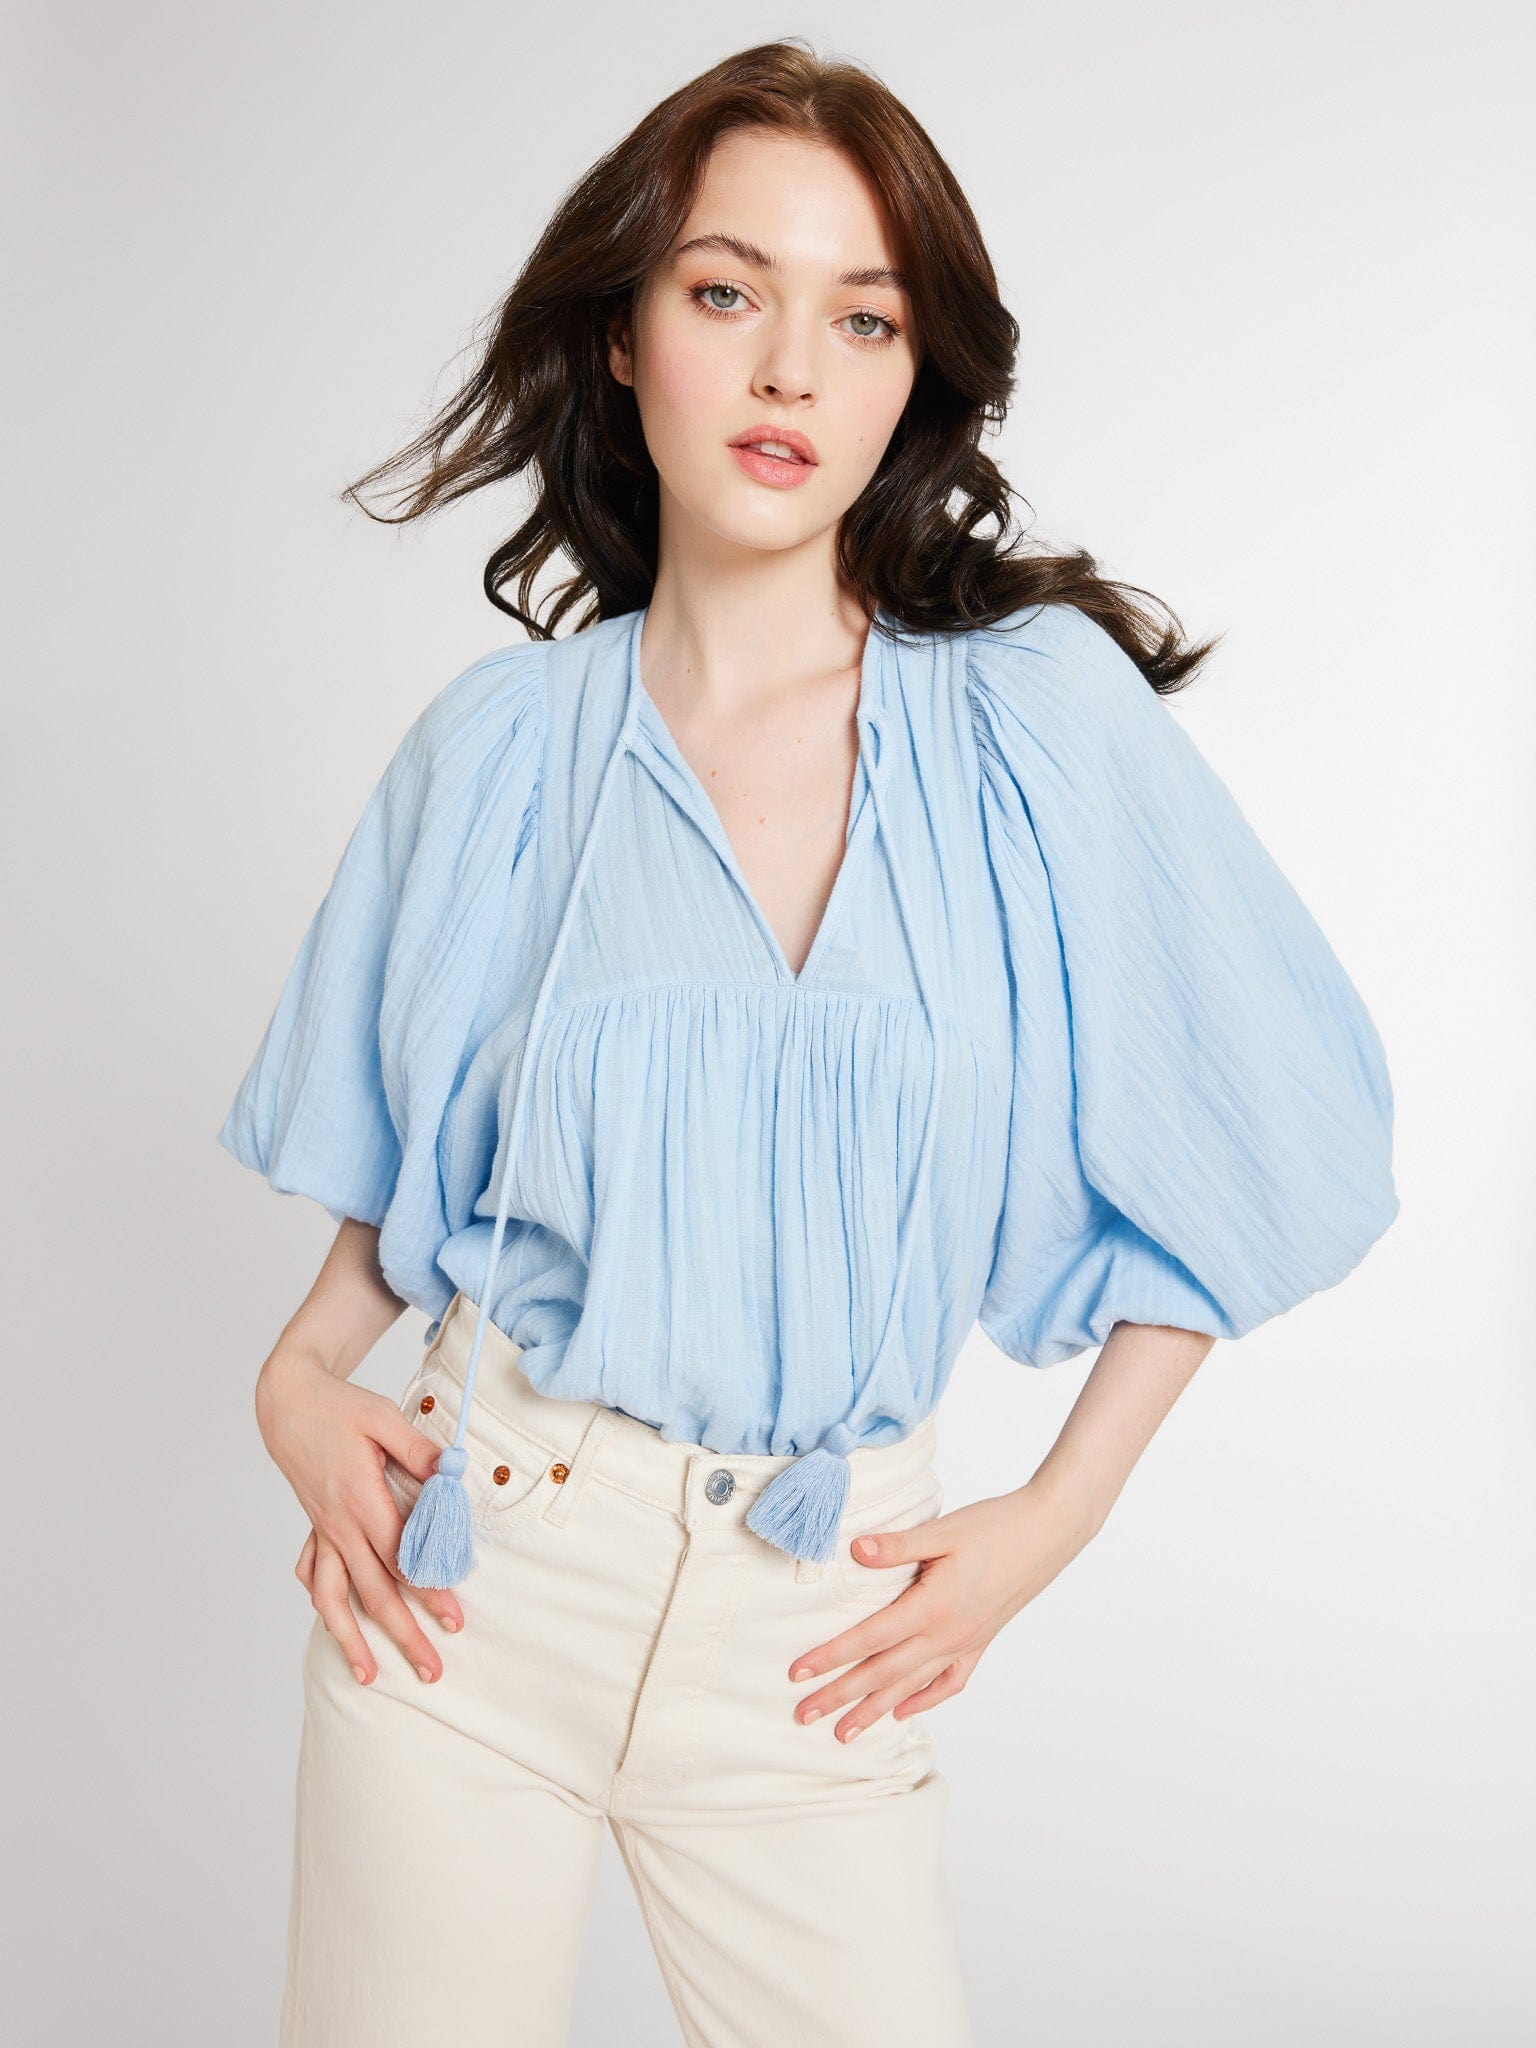 MILLE Clothing Charlie Top in Riviera Double Gauze